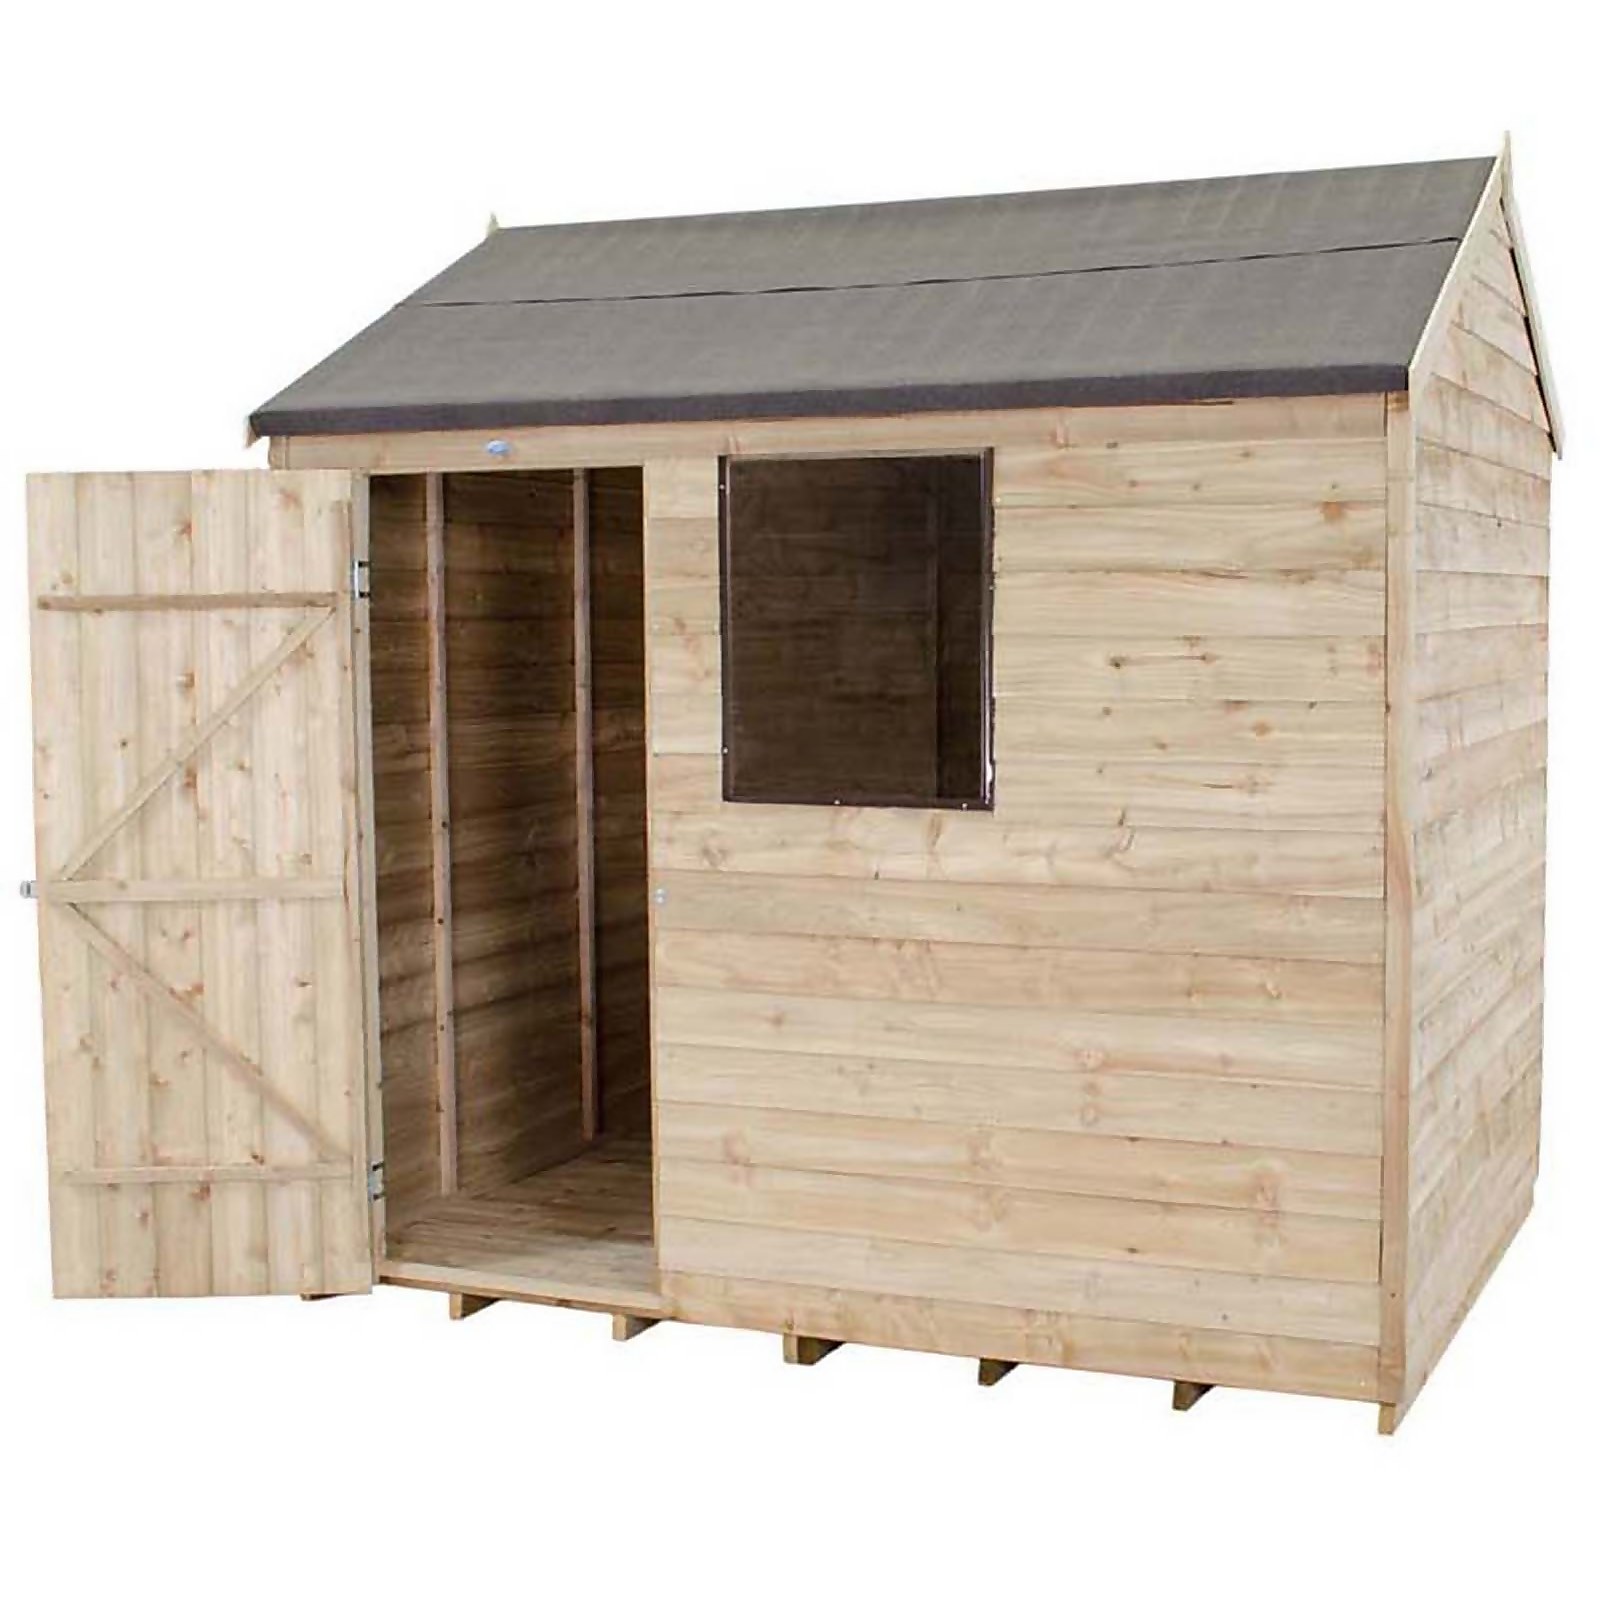 8x6ft Forest Wooden Overlap Pressure Treated Reverse Apex Shed -incl. Installation